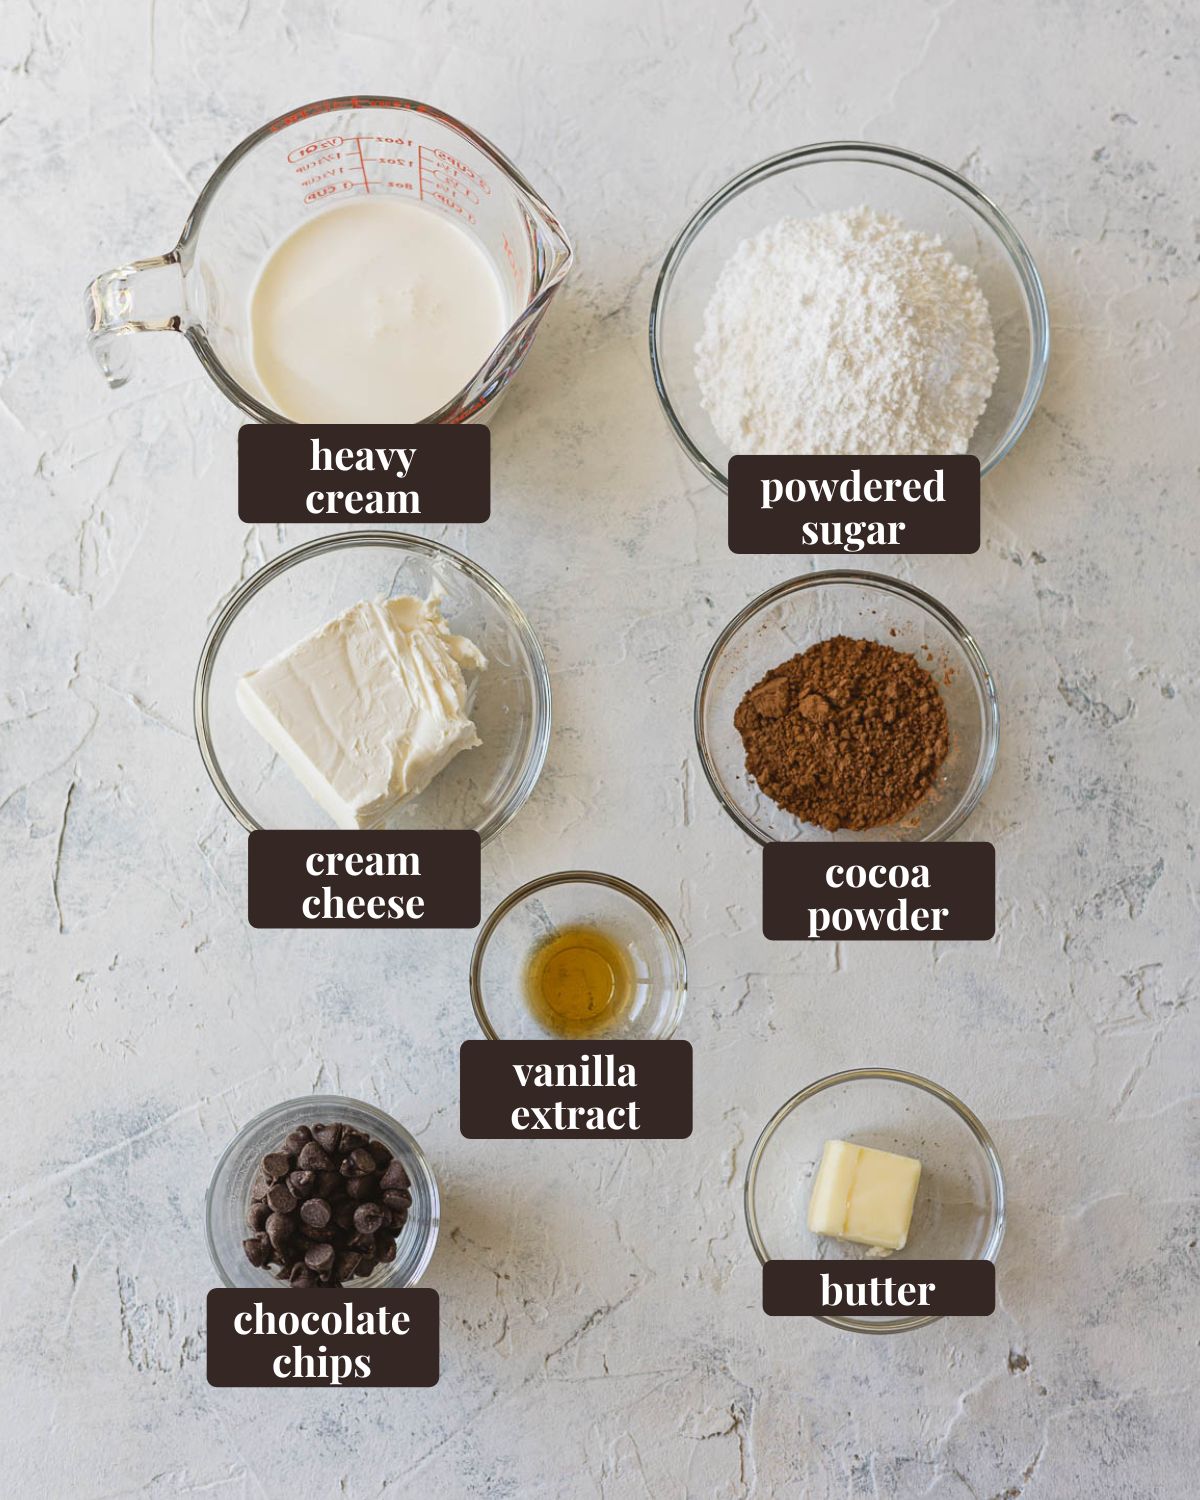 Labeled ingredients for no bake French Silk Pie filling: heavy cream, powdered sugar, cocoa powder, butter, chocolate chips, vanilla extract, and cream cheese.